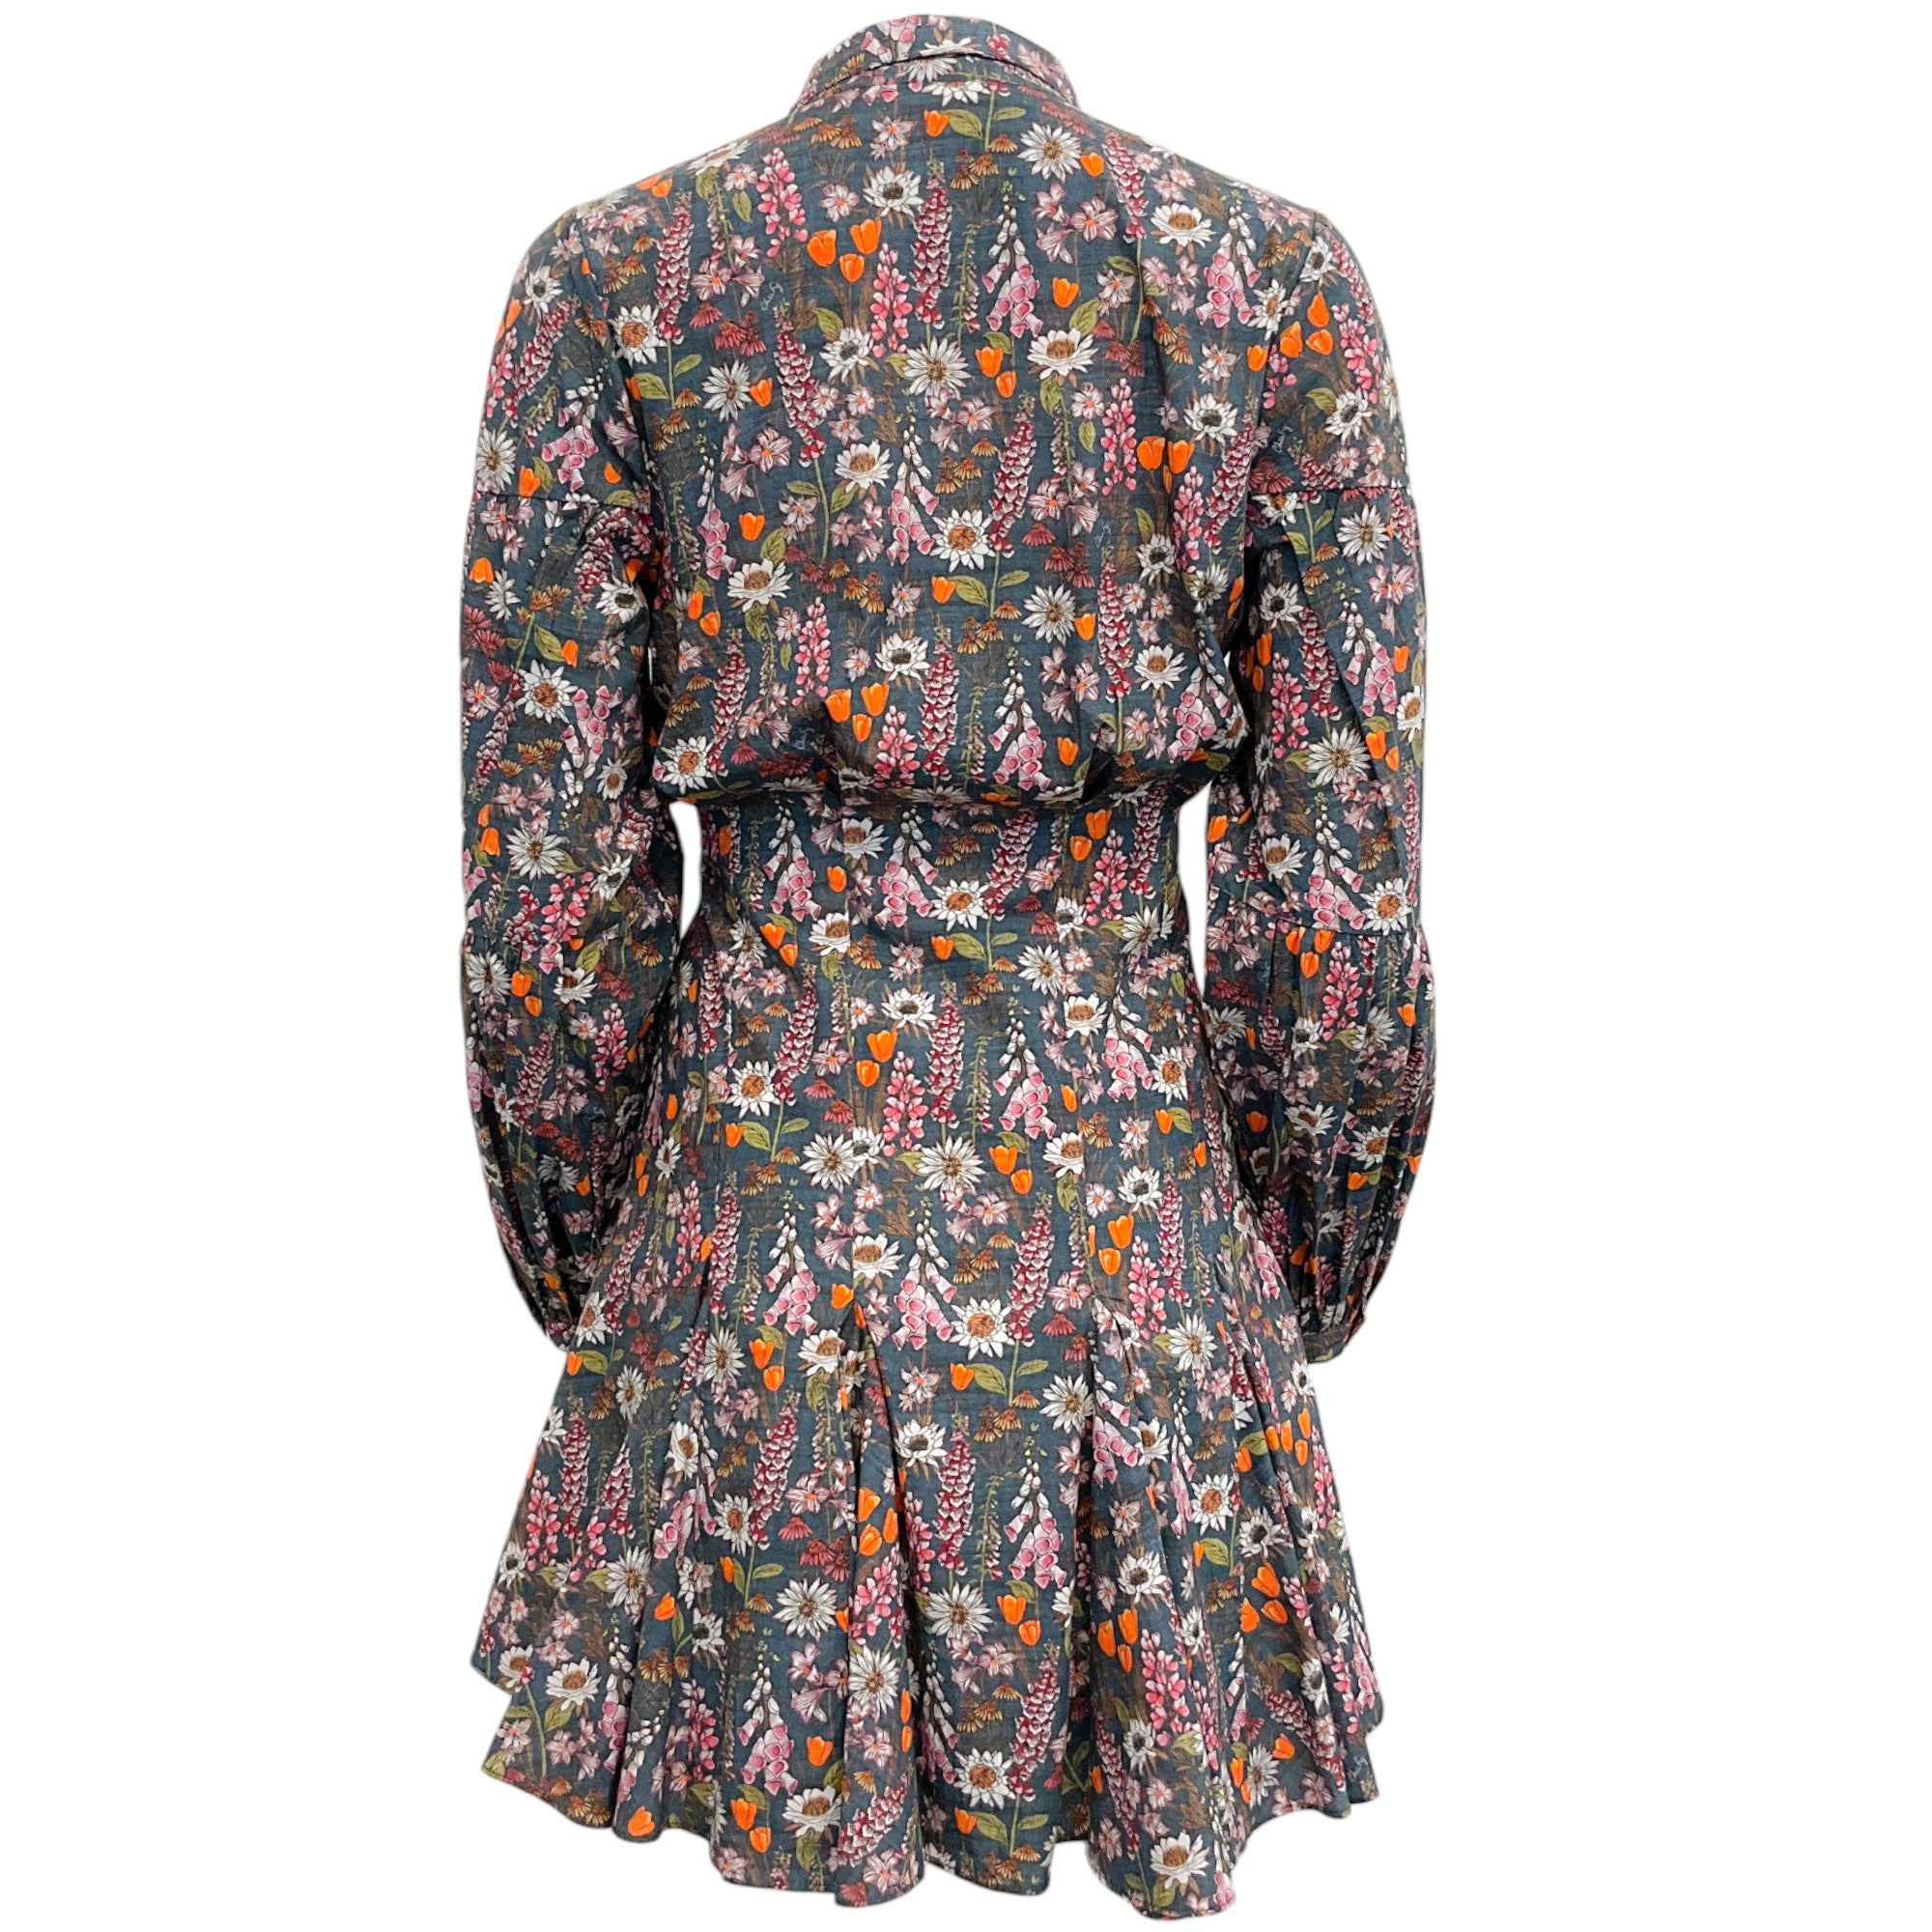 Chufy Navy Blue Multi Floral Button Front Dress